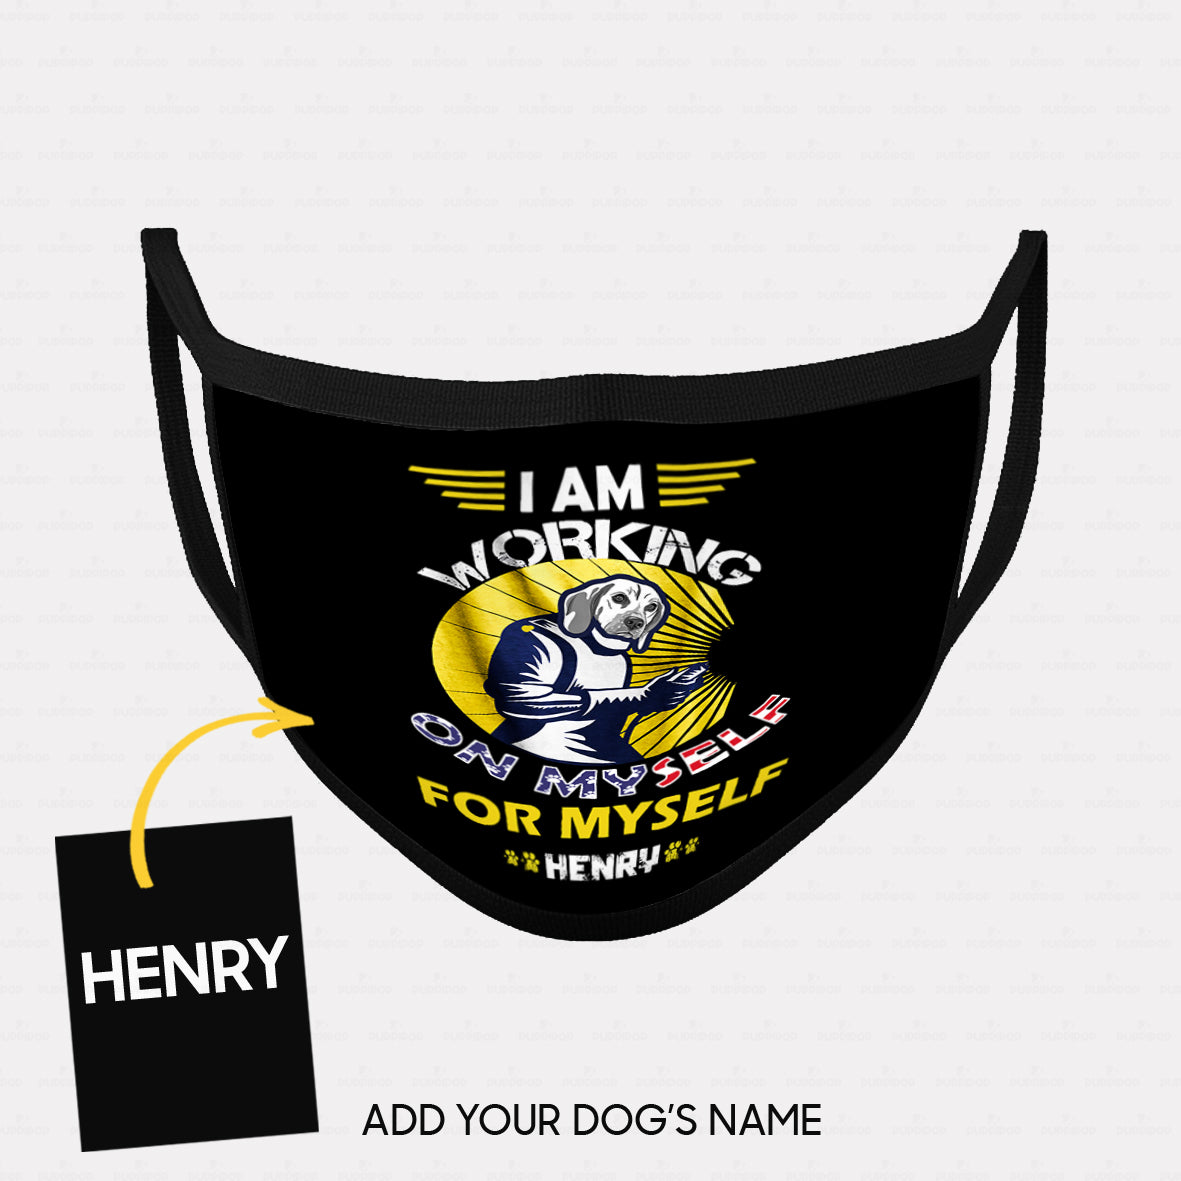 Personalized Dog Mask Gift Idea - I Am Working For Myself For Dog Lovers - Cloth Mask